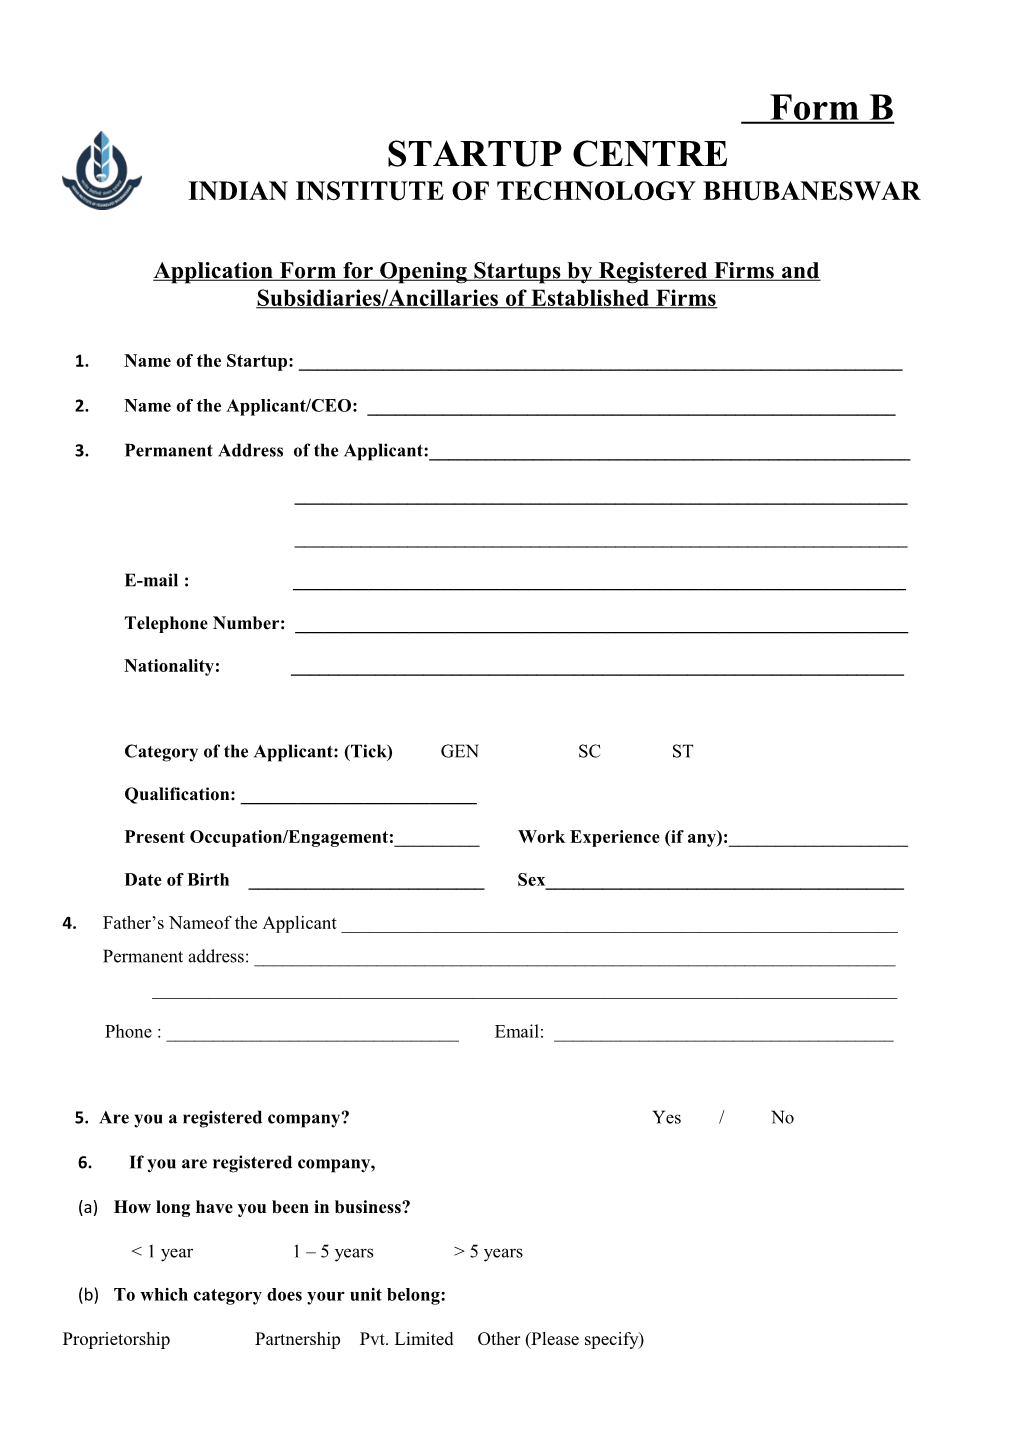 Application Form for Opening Startups by Registered Firms and Subsidiaries/Ancillaries